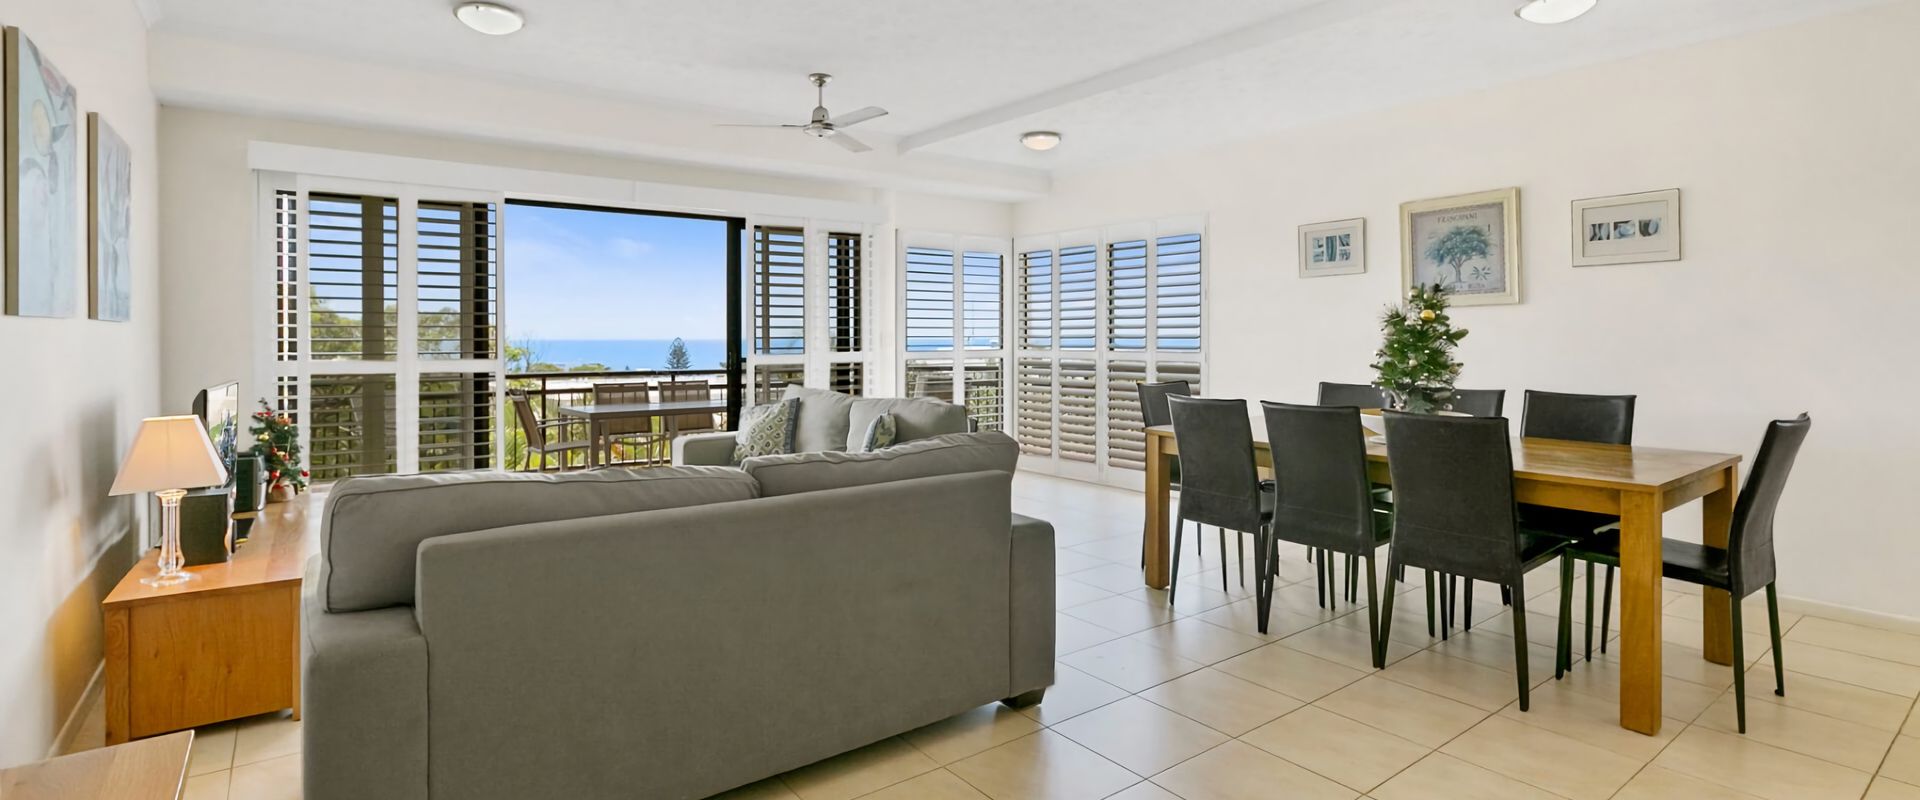 6 Seabreeze – Spacious Newly Renovated Apartment with Ocean Views